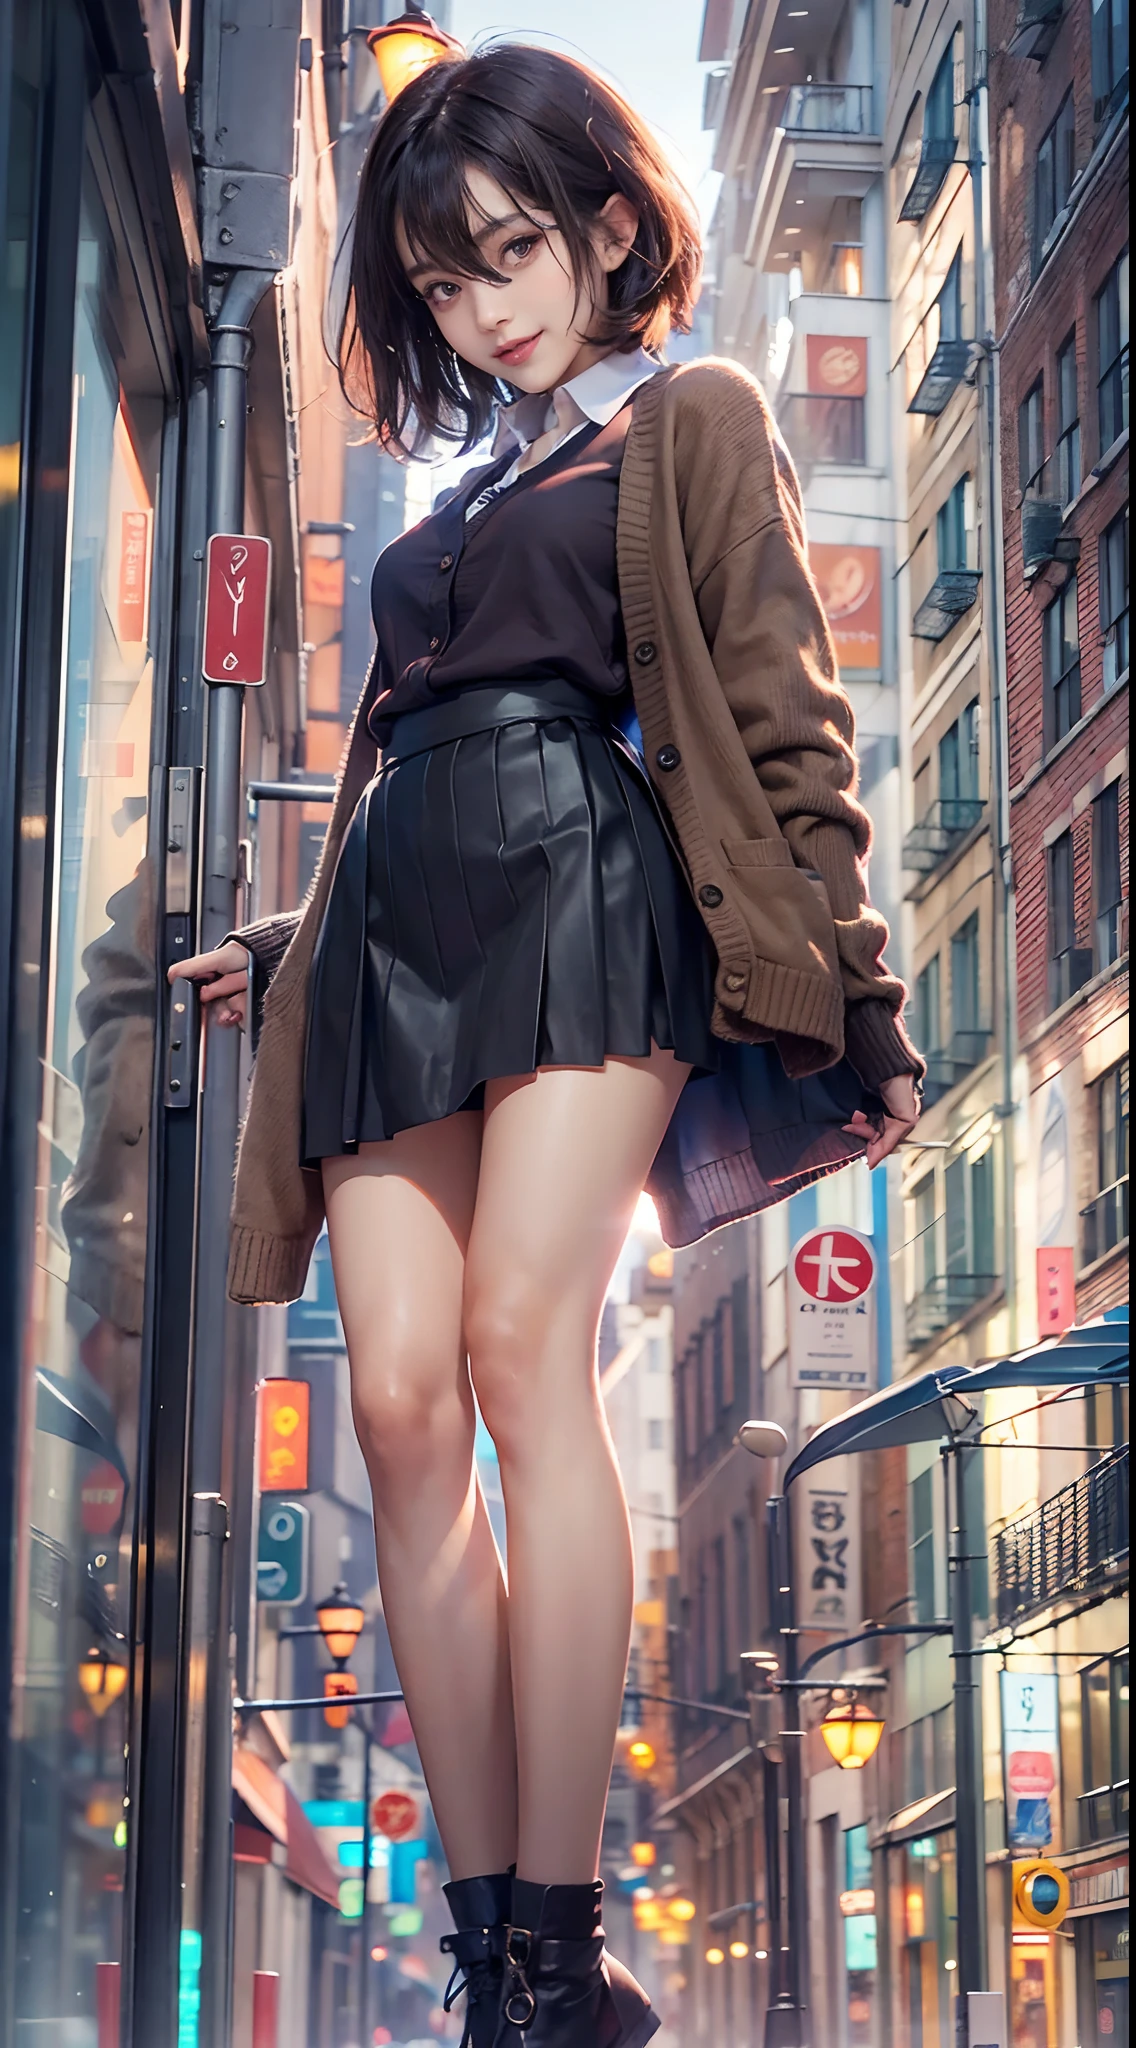 (((skirt rift))), (((Skirt Lift by My Self))), ((Skirt lifted by the wind)), ((panties focus)), ((shool uniform)), ((Cardigan)), ((a miniskirt)), heavy wind, Modern old cityscape,  (NSFW), 1womanl, Solo, 24 year old, 7headed body, (cute  face), (Ideal ratio body proportions), (Composition from head to thigh), Smiling smile, erectile nipple, Sexy body, Wet, short-hair, Dark hair, , A slender, Small buttocks, beauty legs, Skinny Legs, surrealism, Cinematic lighting, depth of fields, One-person viewpoint, F/1.8, 135 mm, nffsw, masutepiece, ccurate, ((Anatomically correct)), Textured skin, Super Detail, high details, High quality, awardwinning, Best Quality, hight resolution, 8K